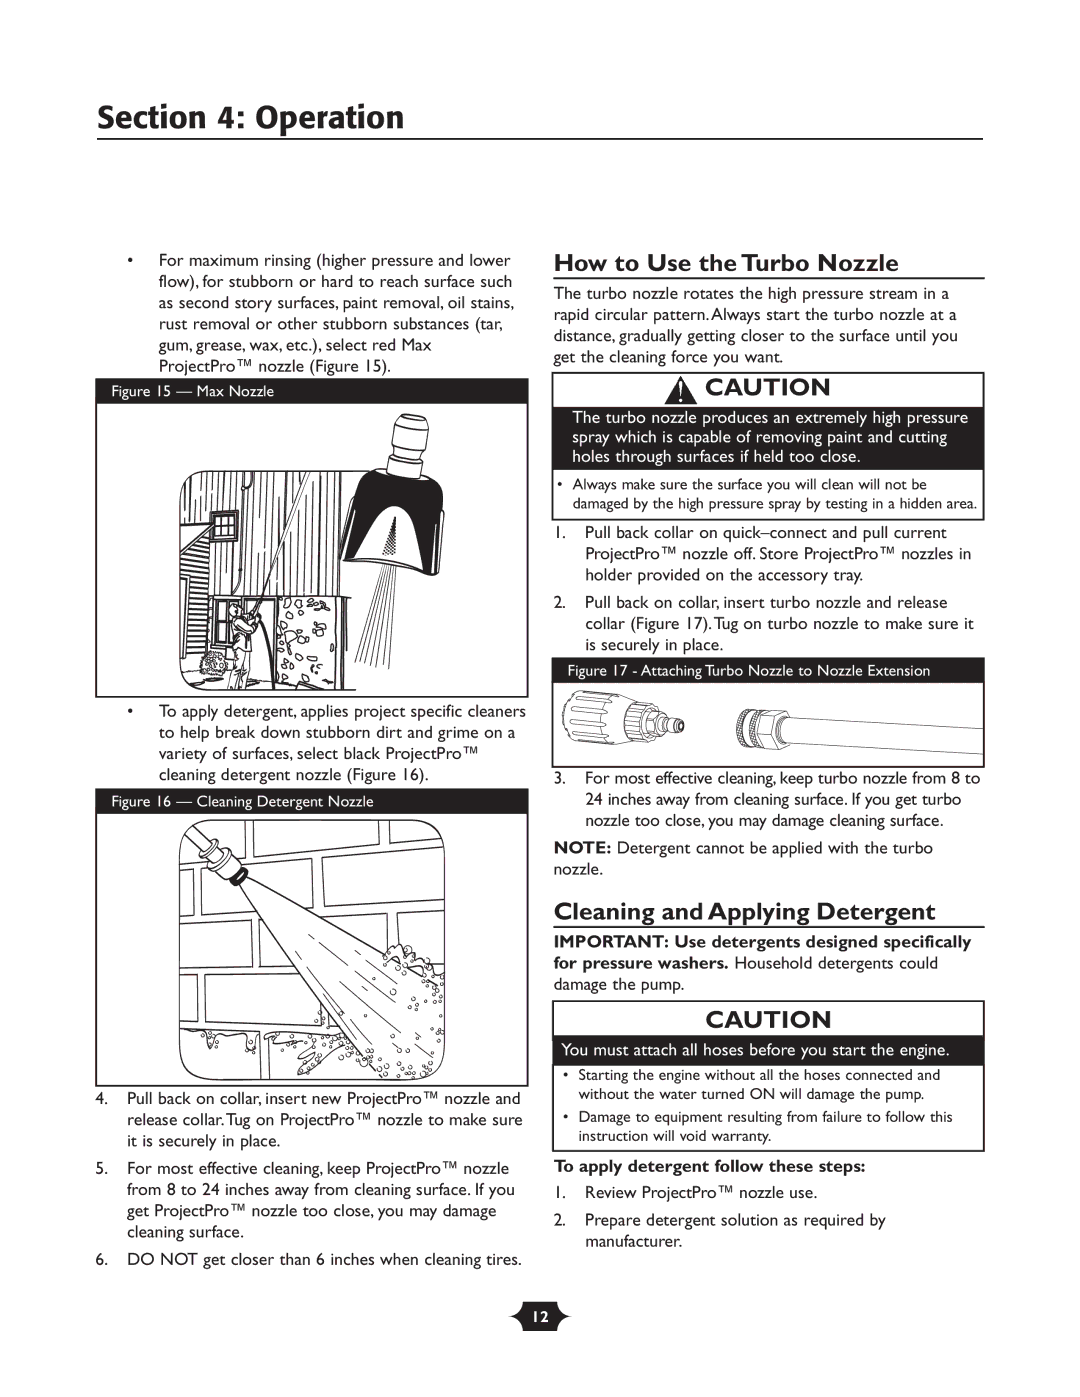 Briggs & Stratton 20228, 195764GS owner manual How to Use the Turbo Nozzle, Cleaning and Applying Detergent 